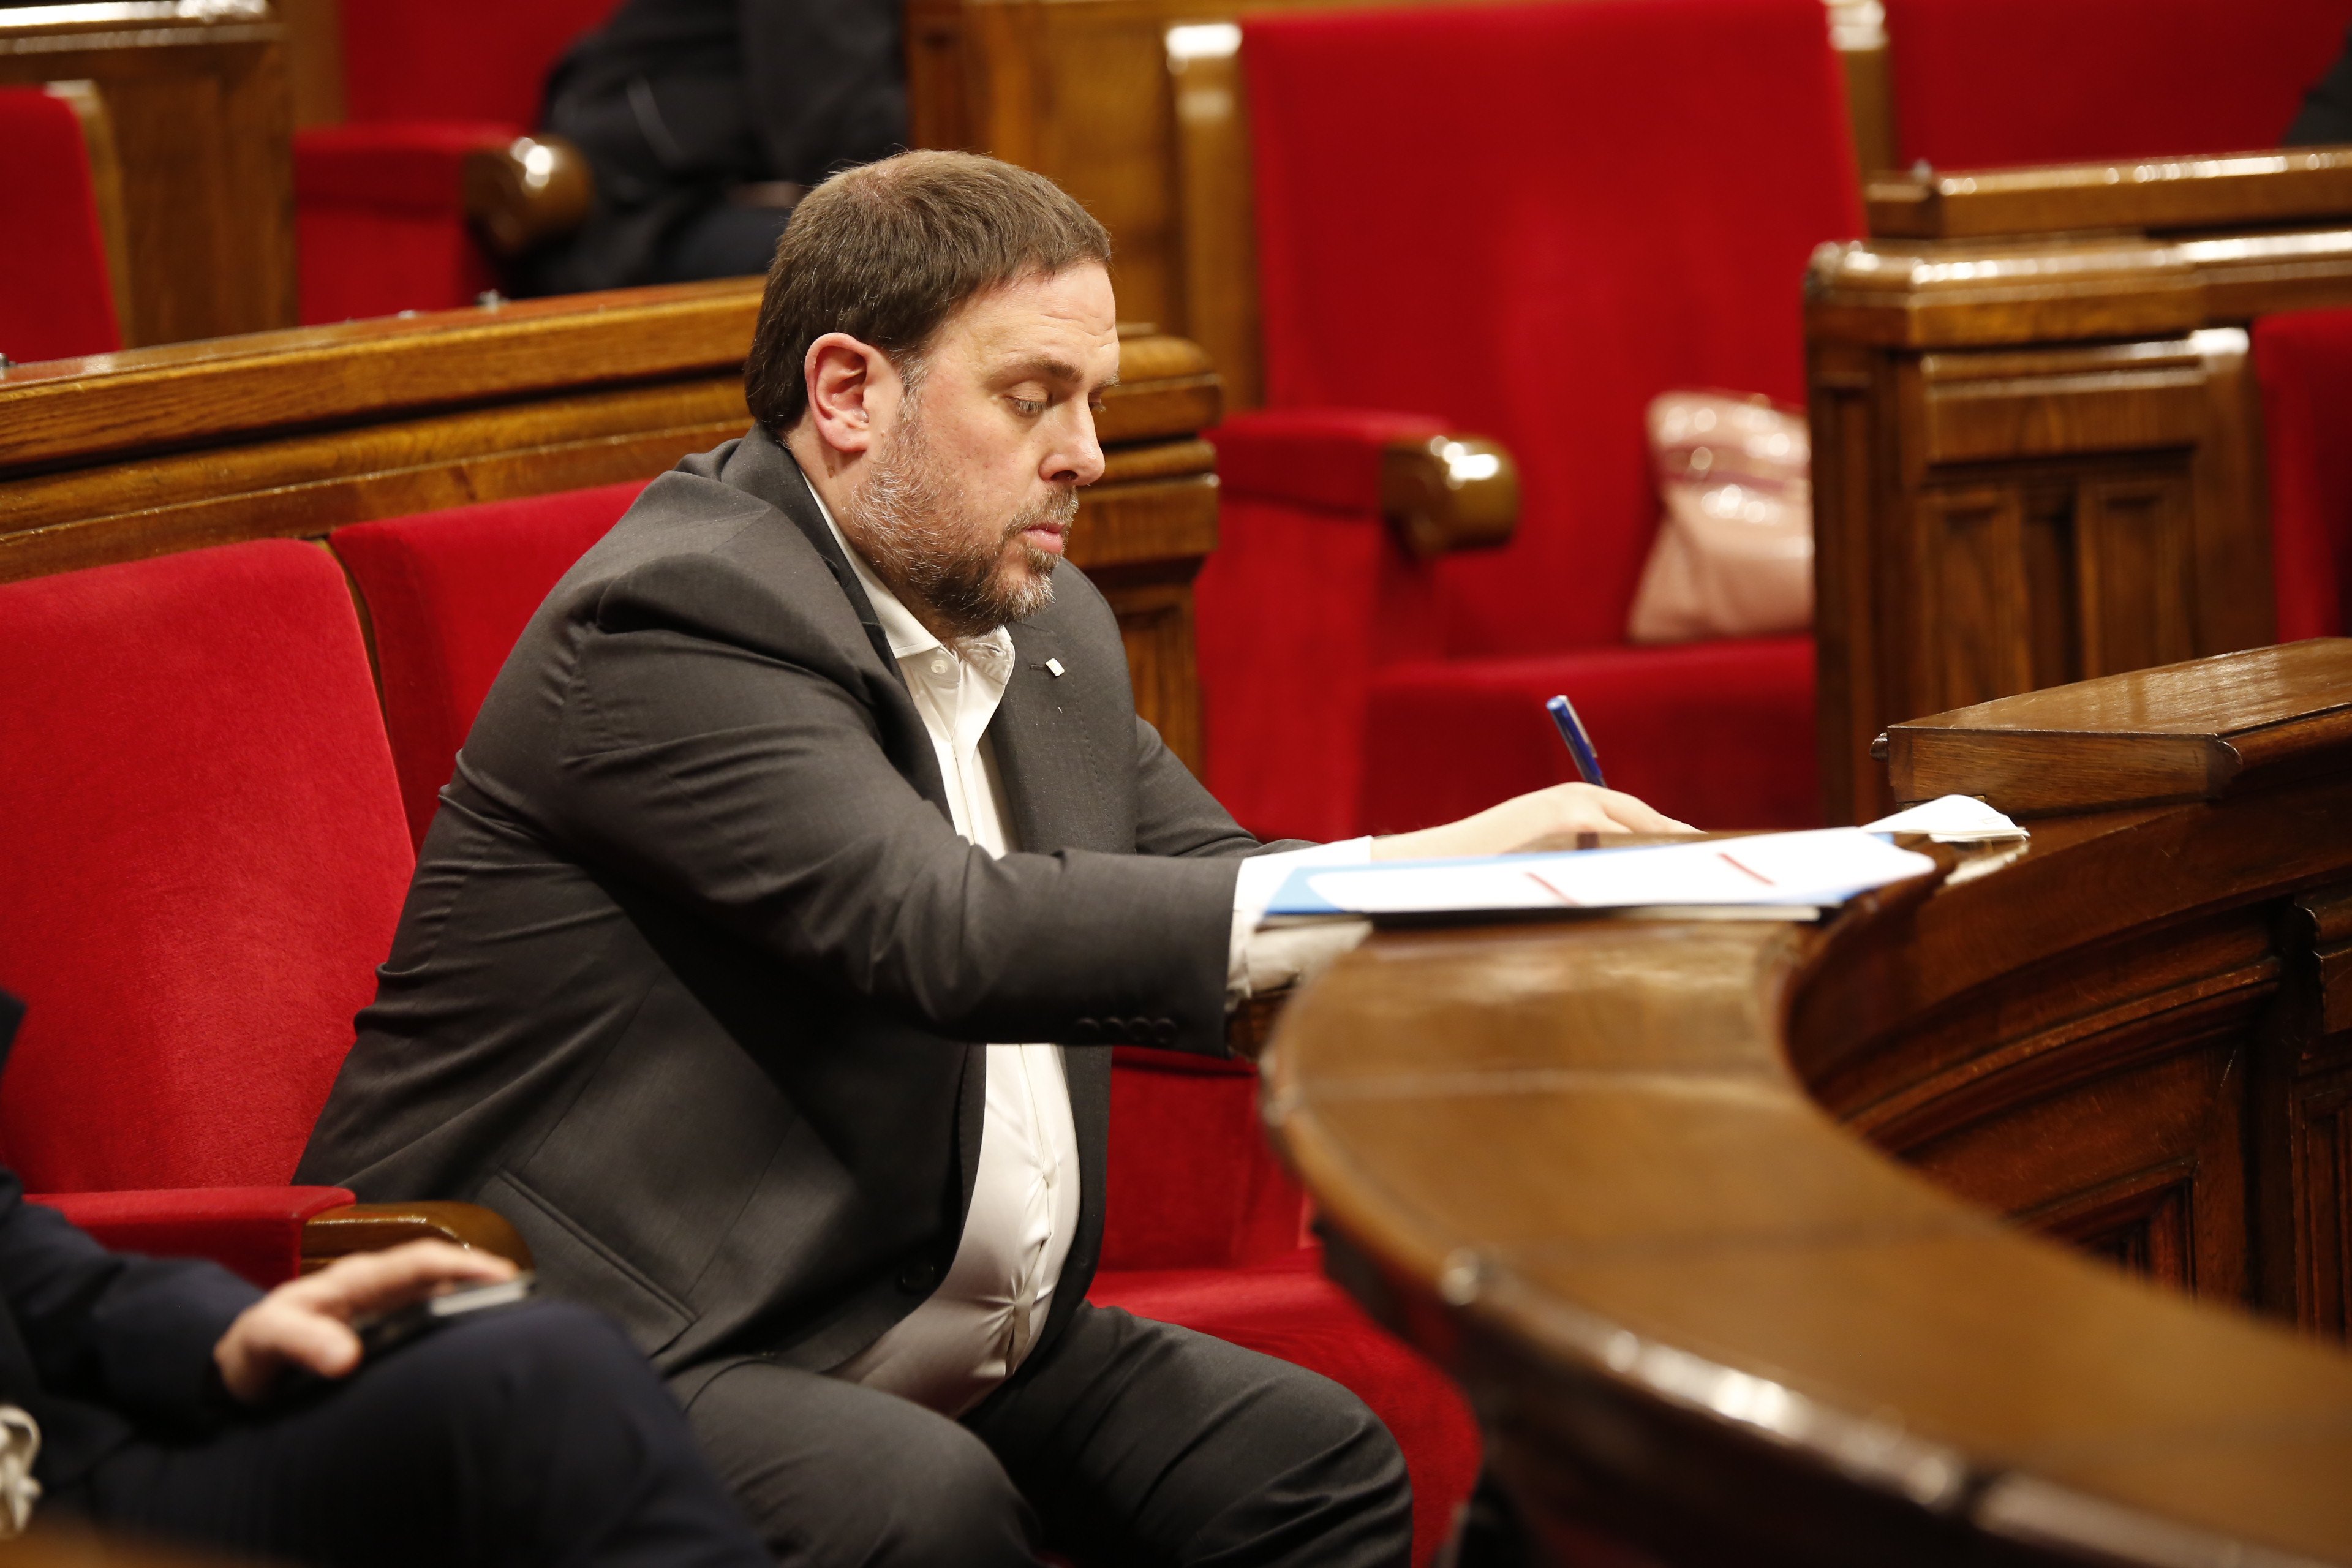 Oriol Junqueras emphatically denies independence is a fraud: "That's bullsh*t!"